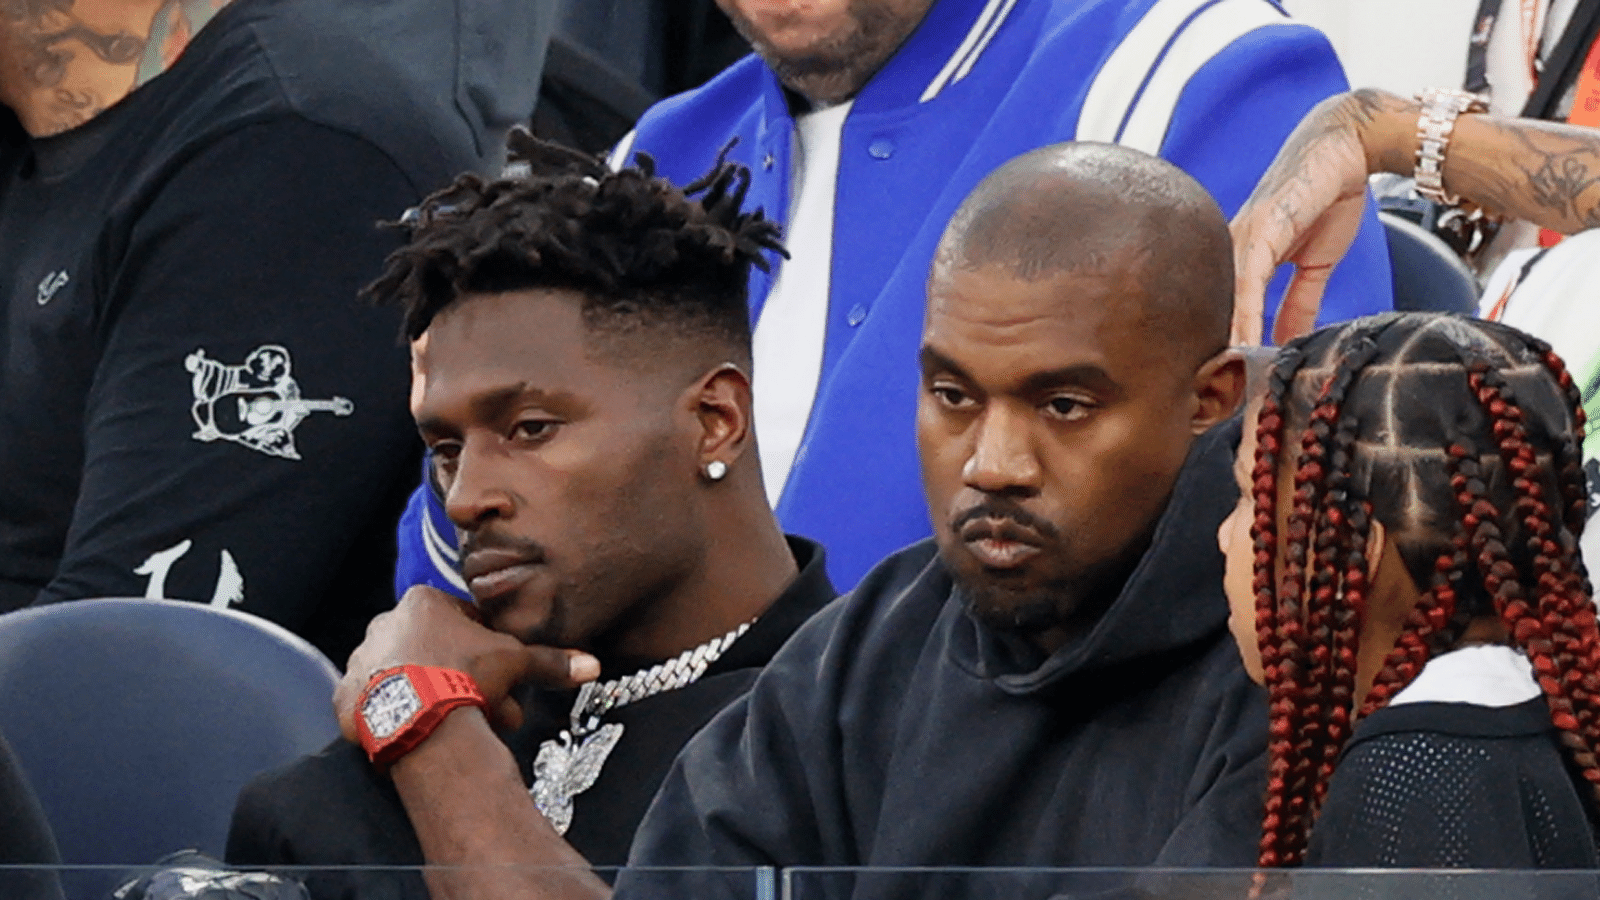 Antonio Brown is the only athlete to support Kanye West after his antisemitic comments